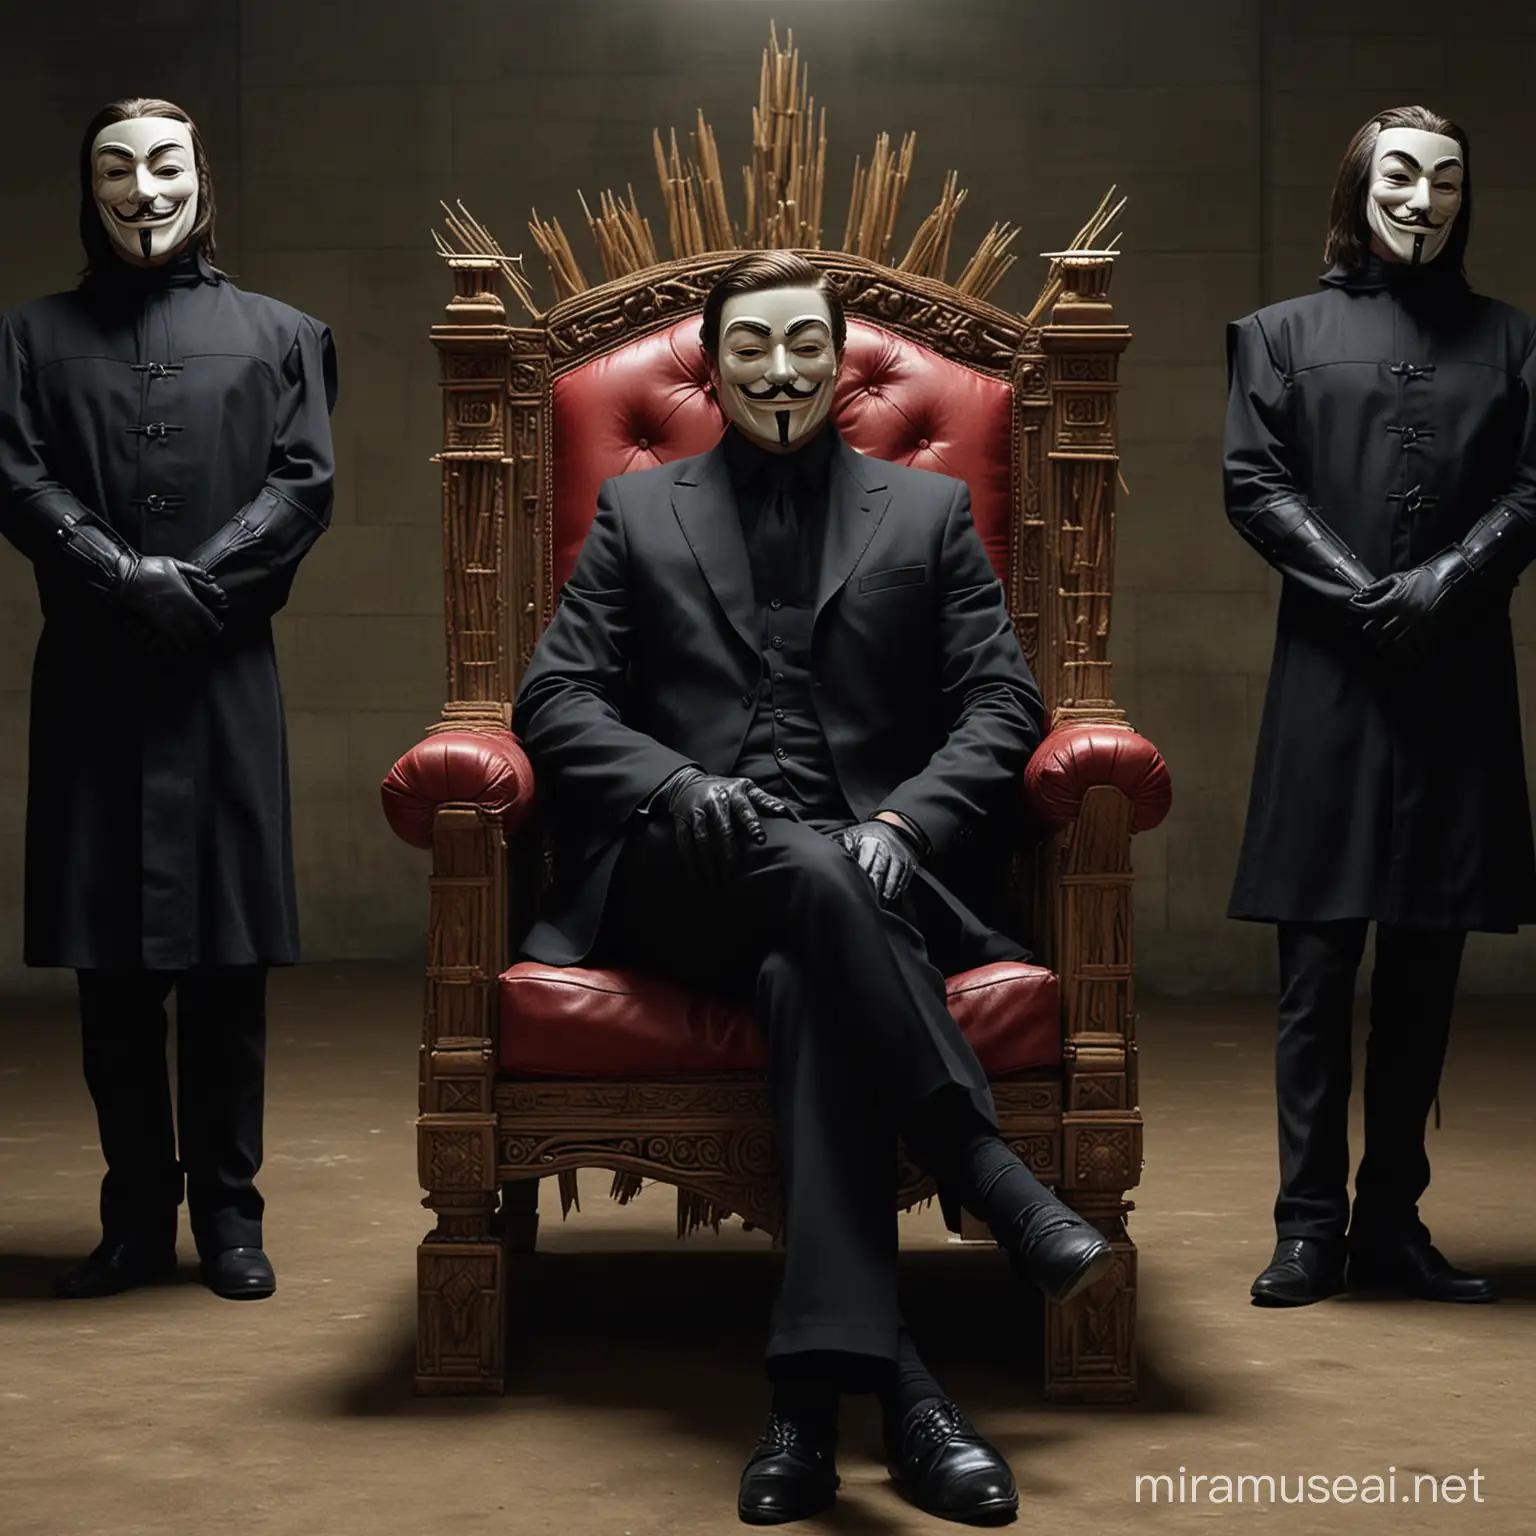 v for vendetta sits on his throne Make his throne an elegant chair and make v for vendetta wear a suit